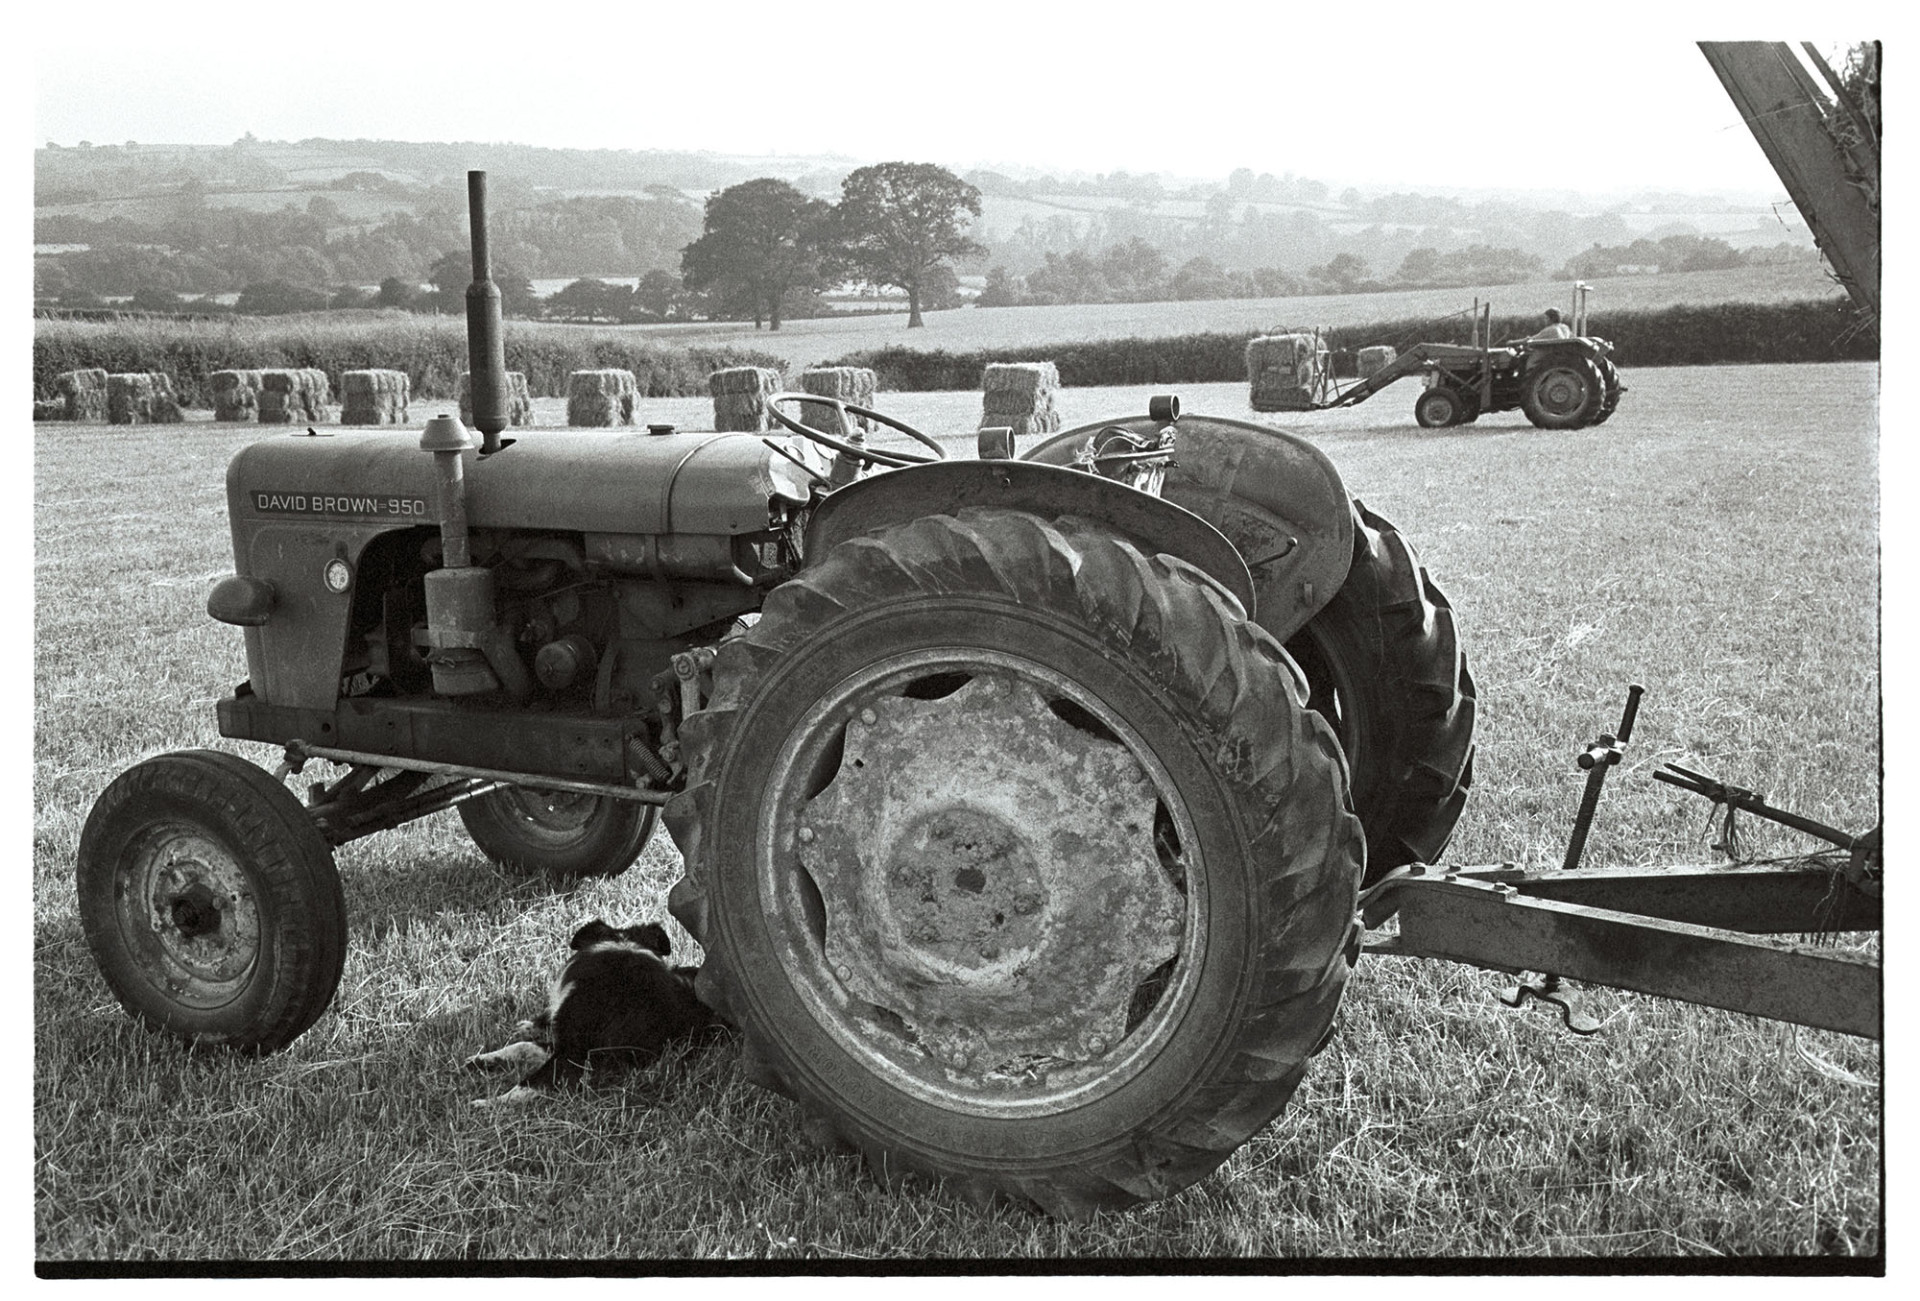 Haymaking, tractor in field with dog.
[A dog lying in the shade under a tractor during haymaking at Nethercott, Iddesleigh.  In the background are a row of stacked hay bales and a tractor carrying hay bales using a front bale lifter.]